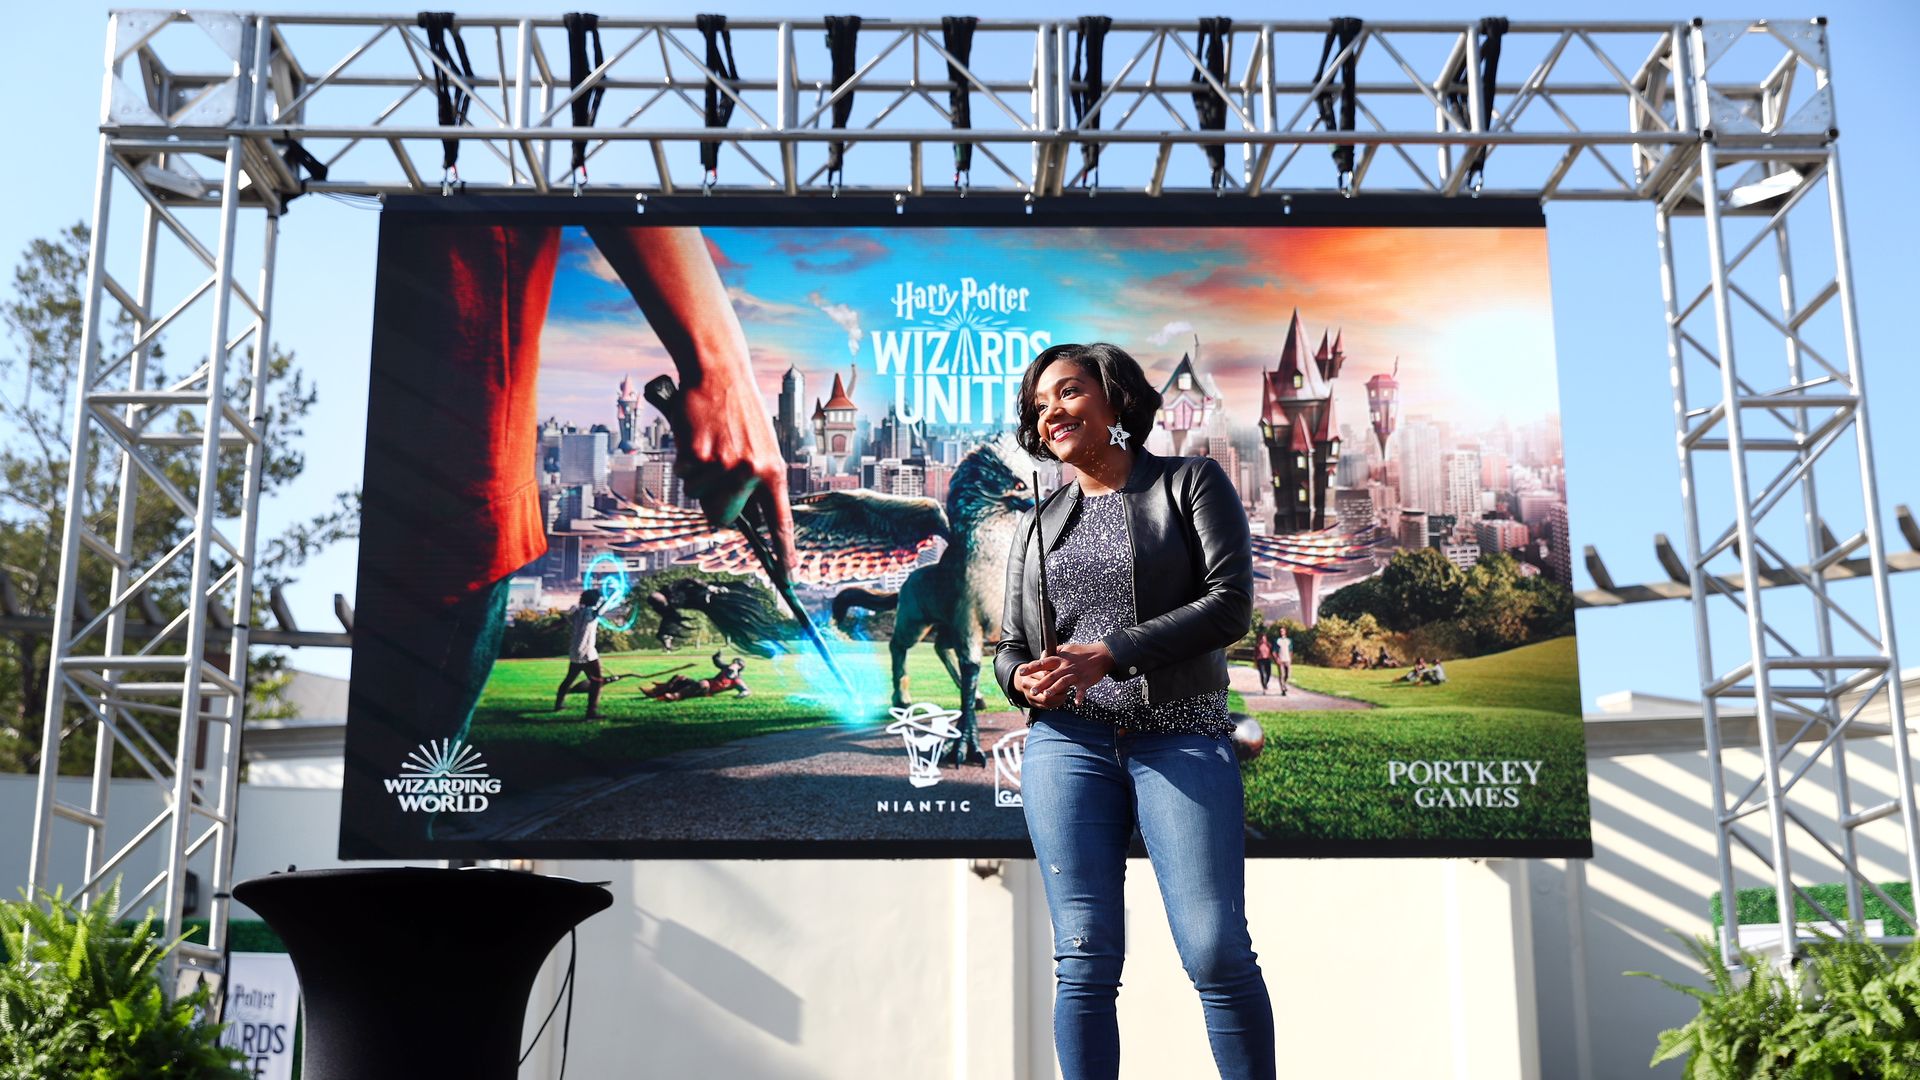 In this image, Tiffany Haddish stands outside on stage with the poster for Wizards Unite behind her.